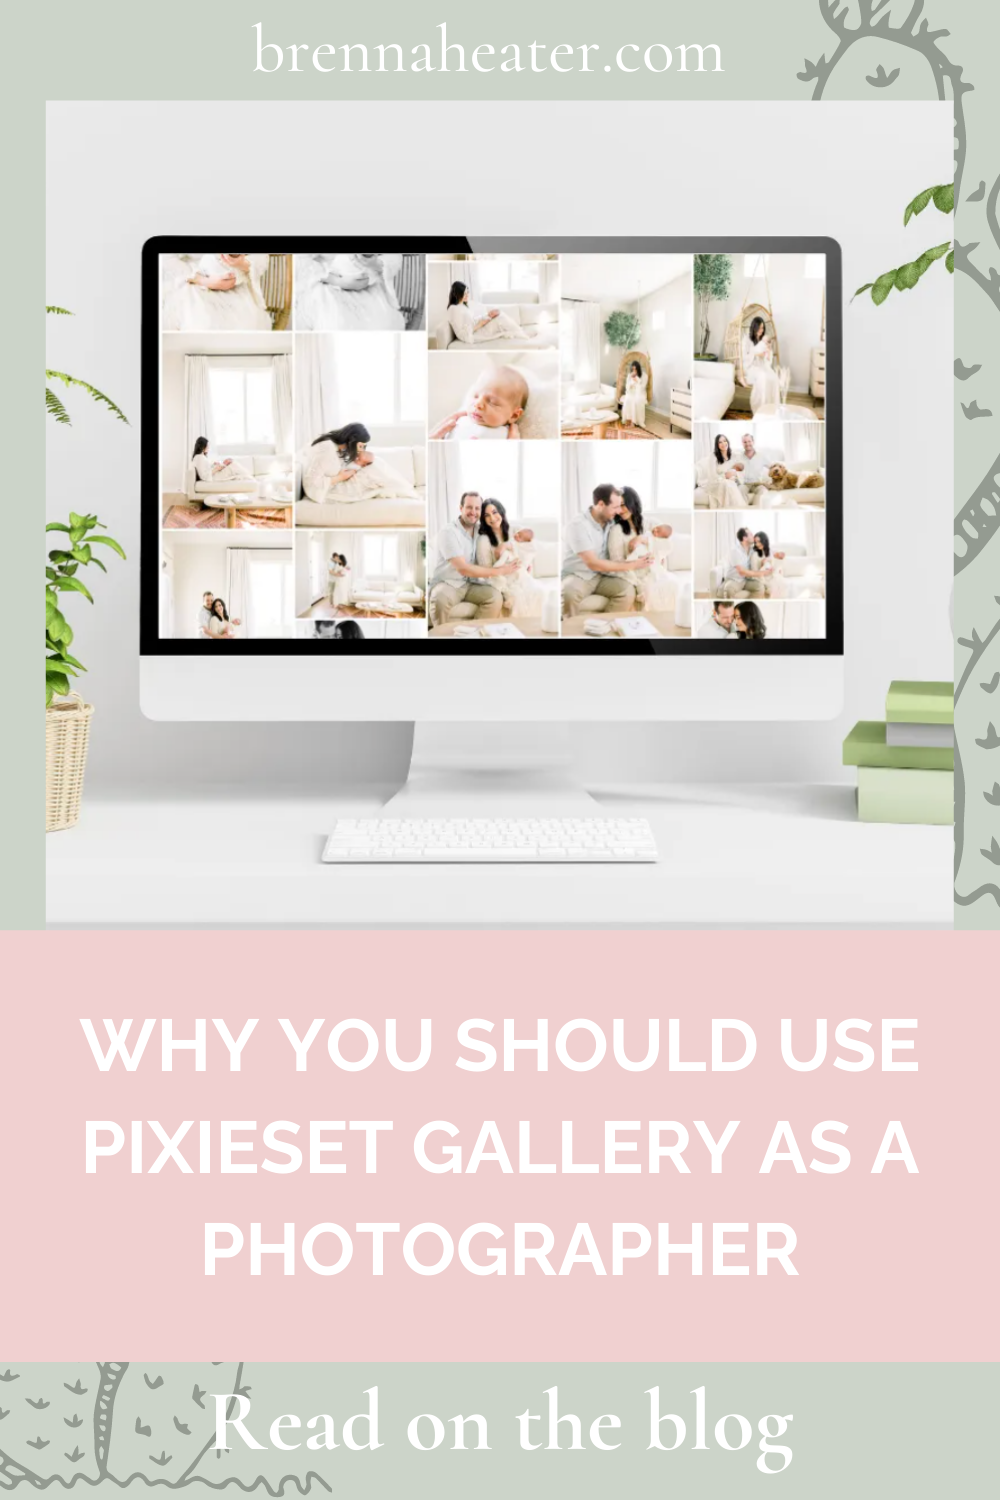 pixieset-gallery-for-photographers3